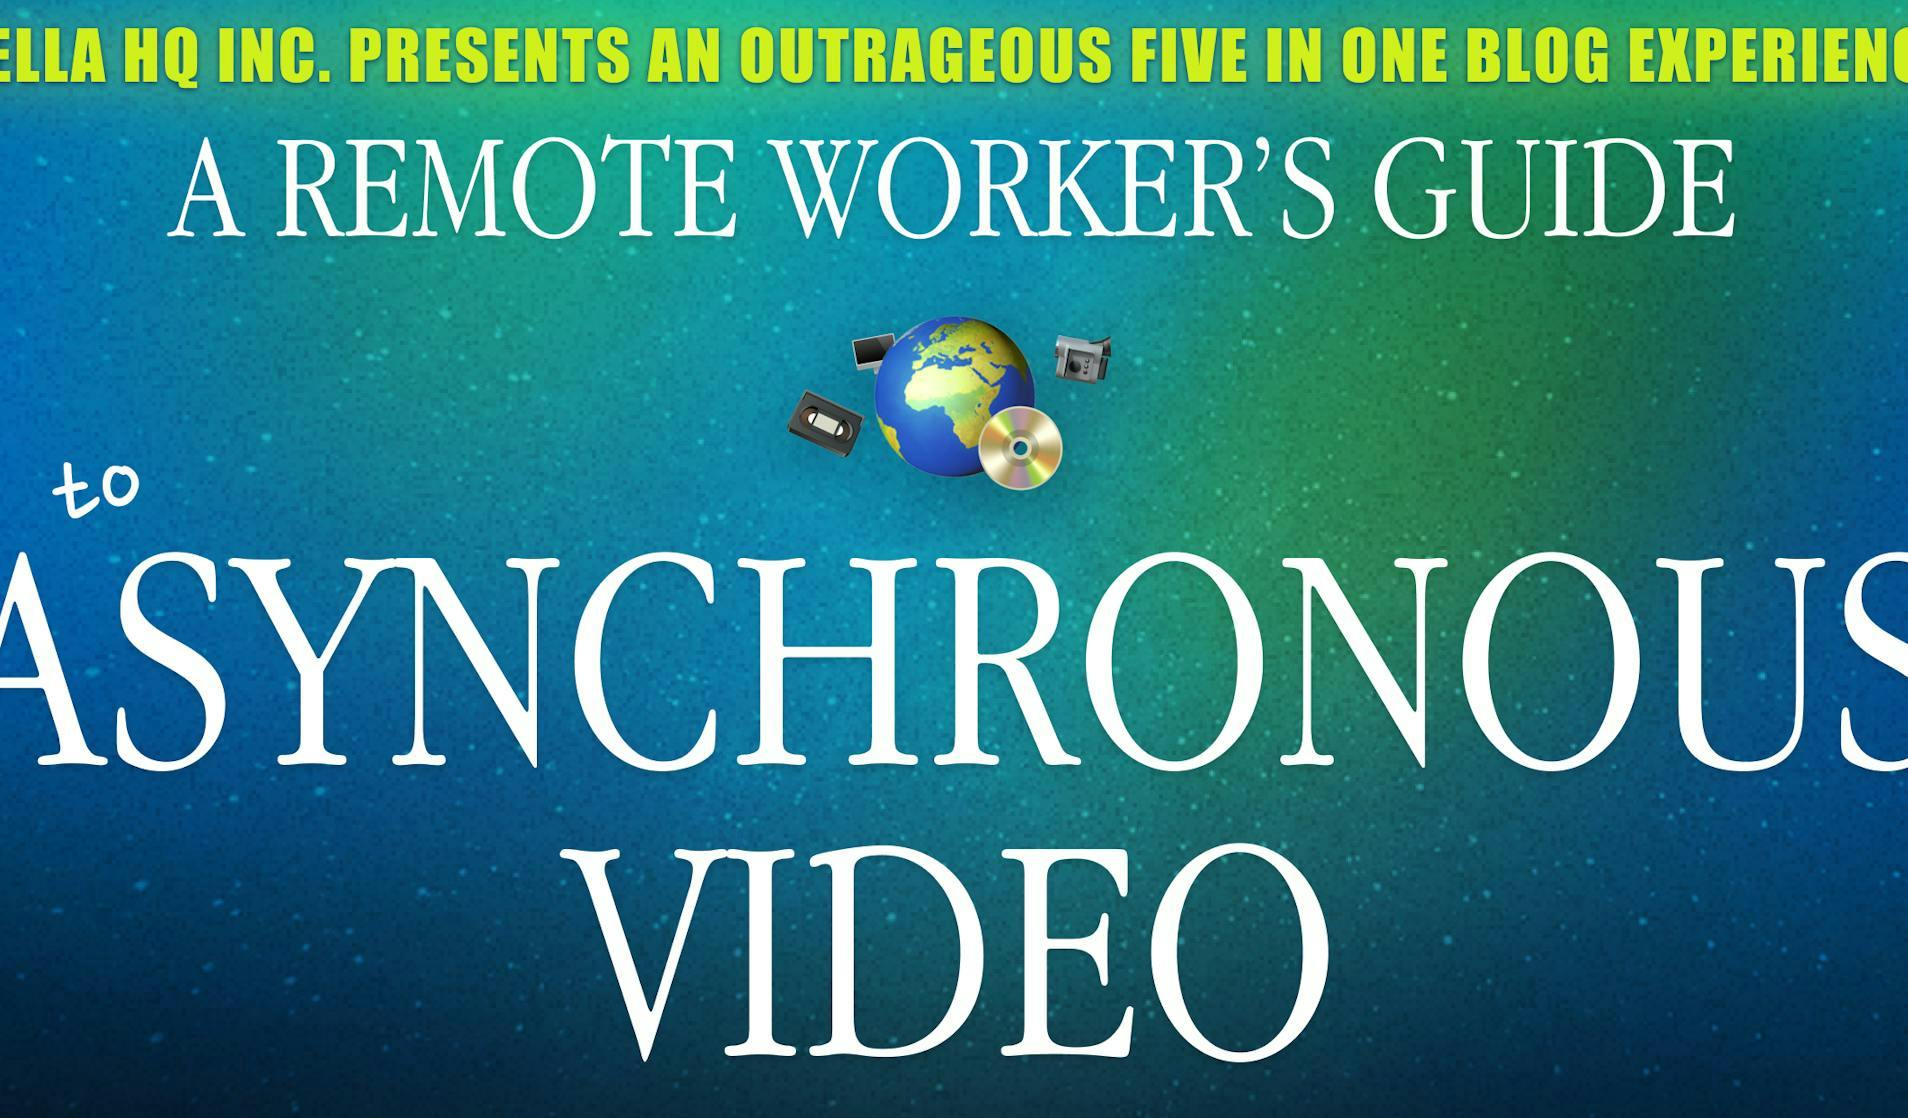 A Remote Worker’s Guide To Asynchronous Video